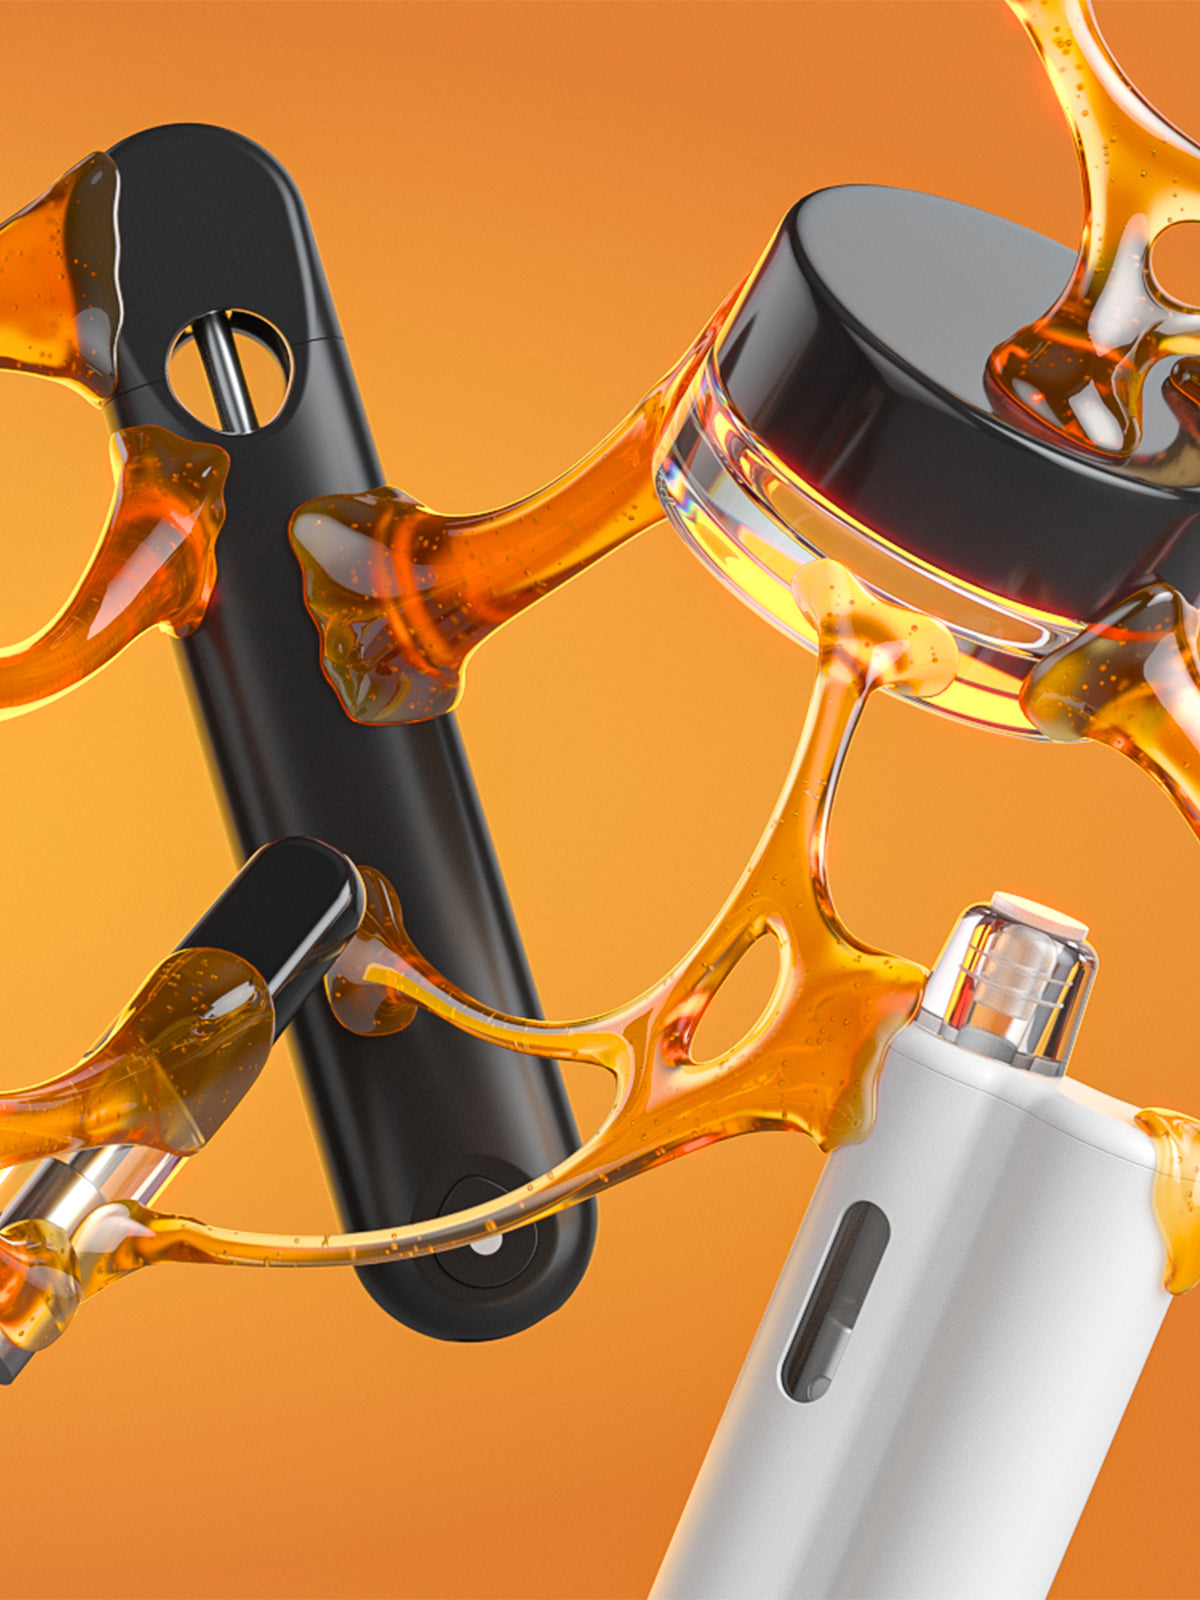 Child-resistant glass concentrate jars and vape hardware connected by oil on orange background zoomed in